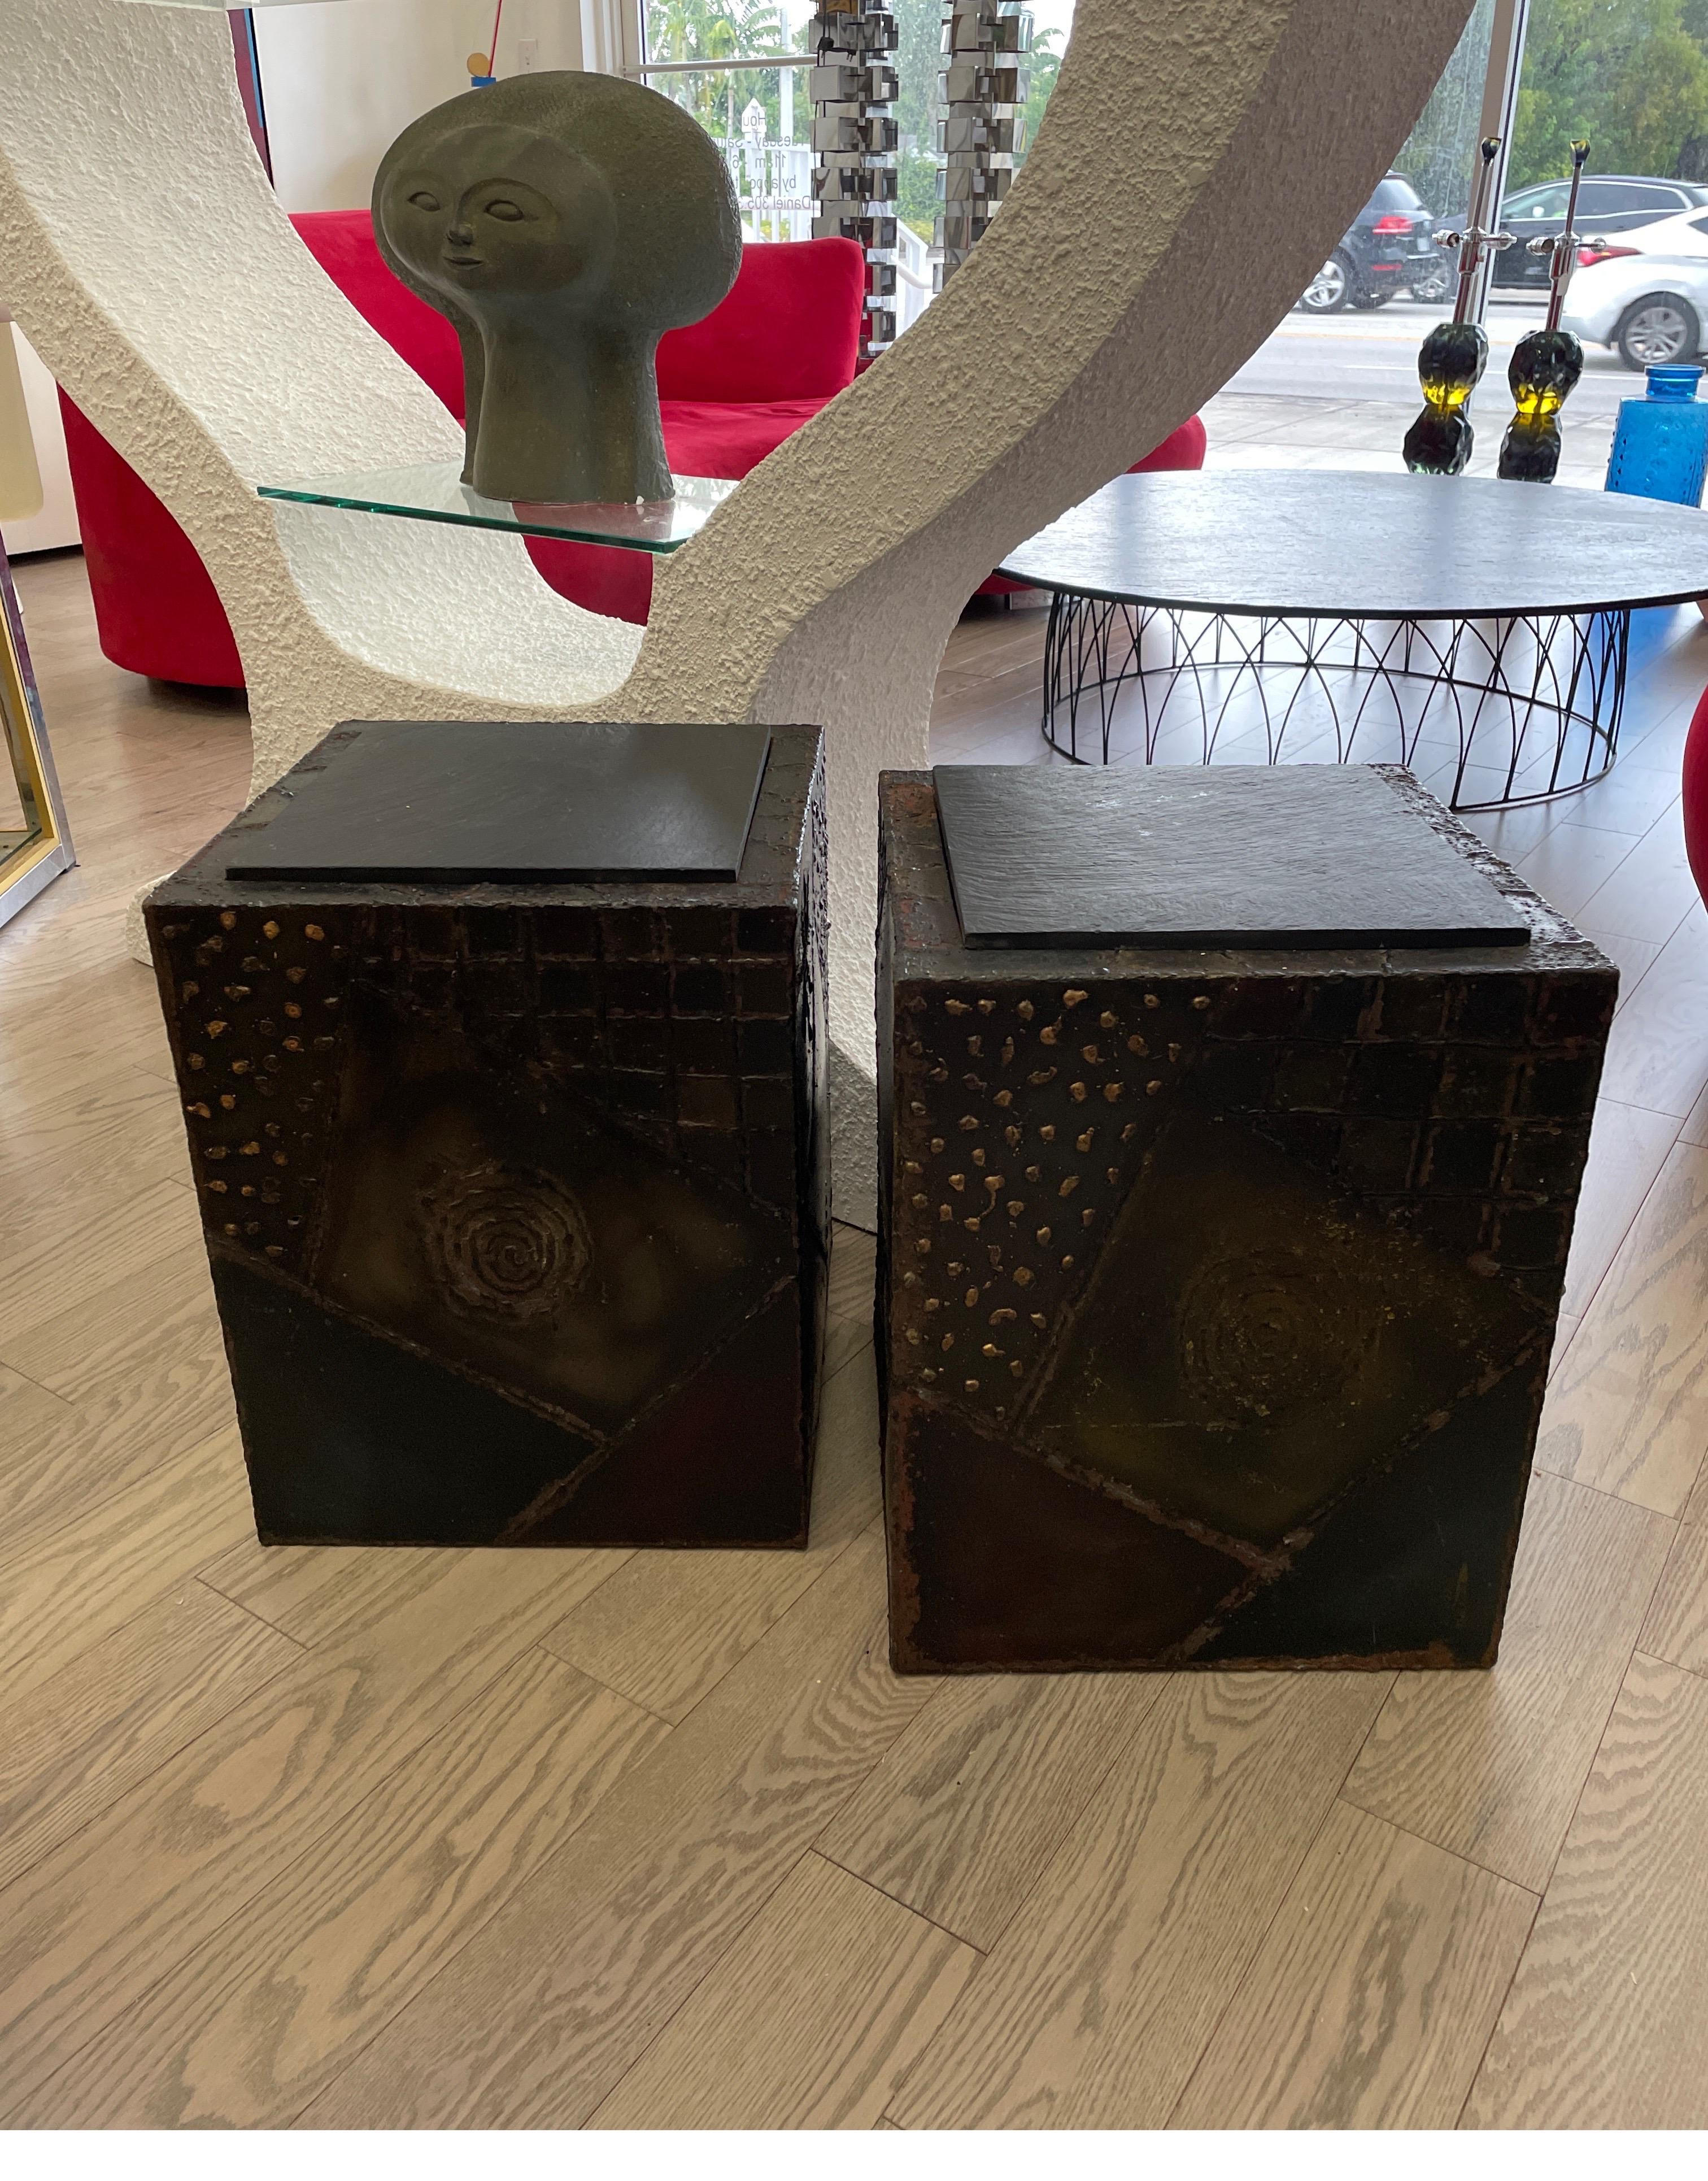 A pair of sculptural side tables in the Brutalist style by Paul Evans. These tables are both signed and dated 1971. An iconic design.